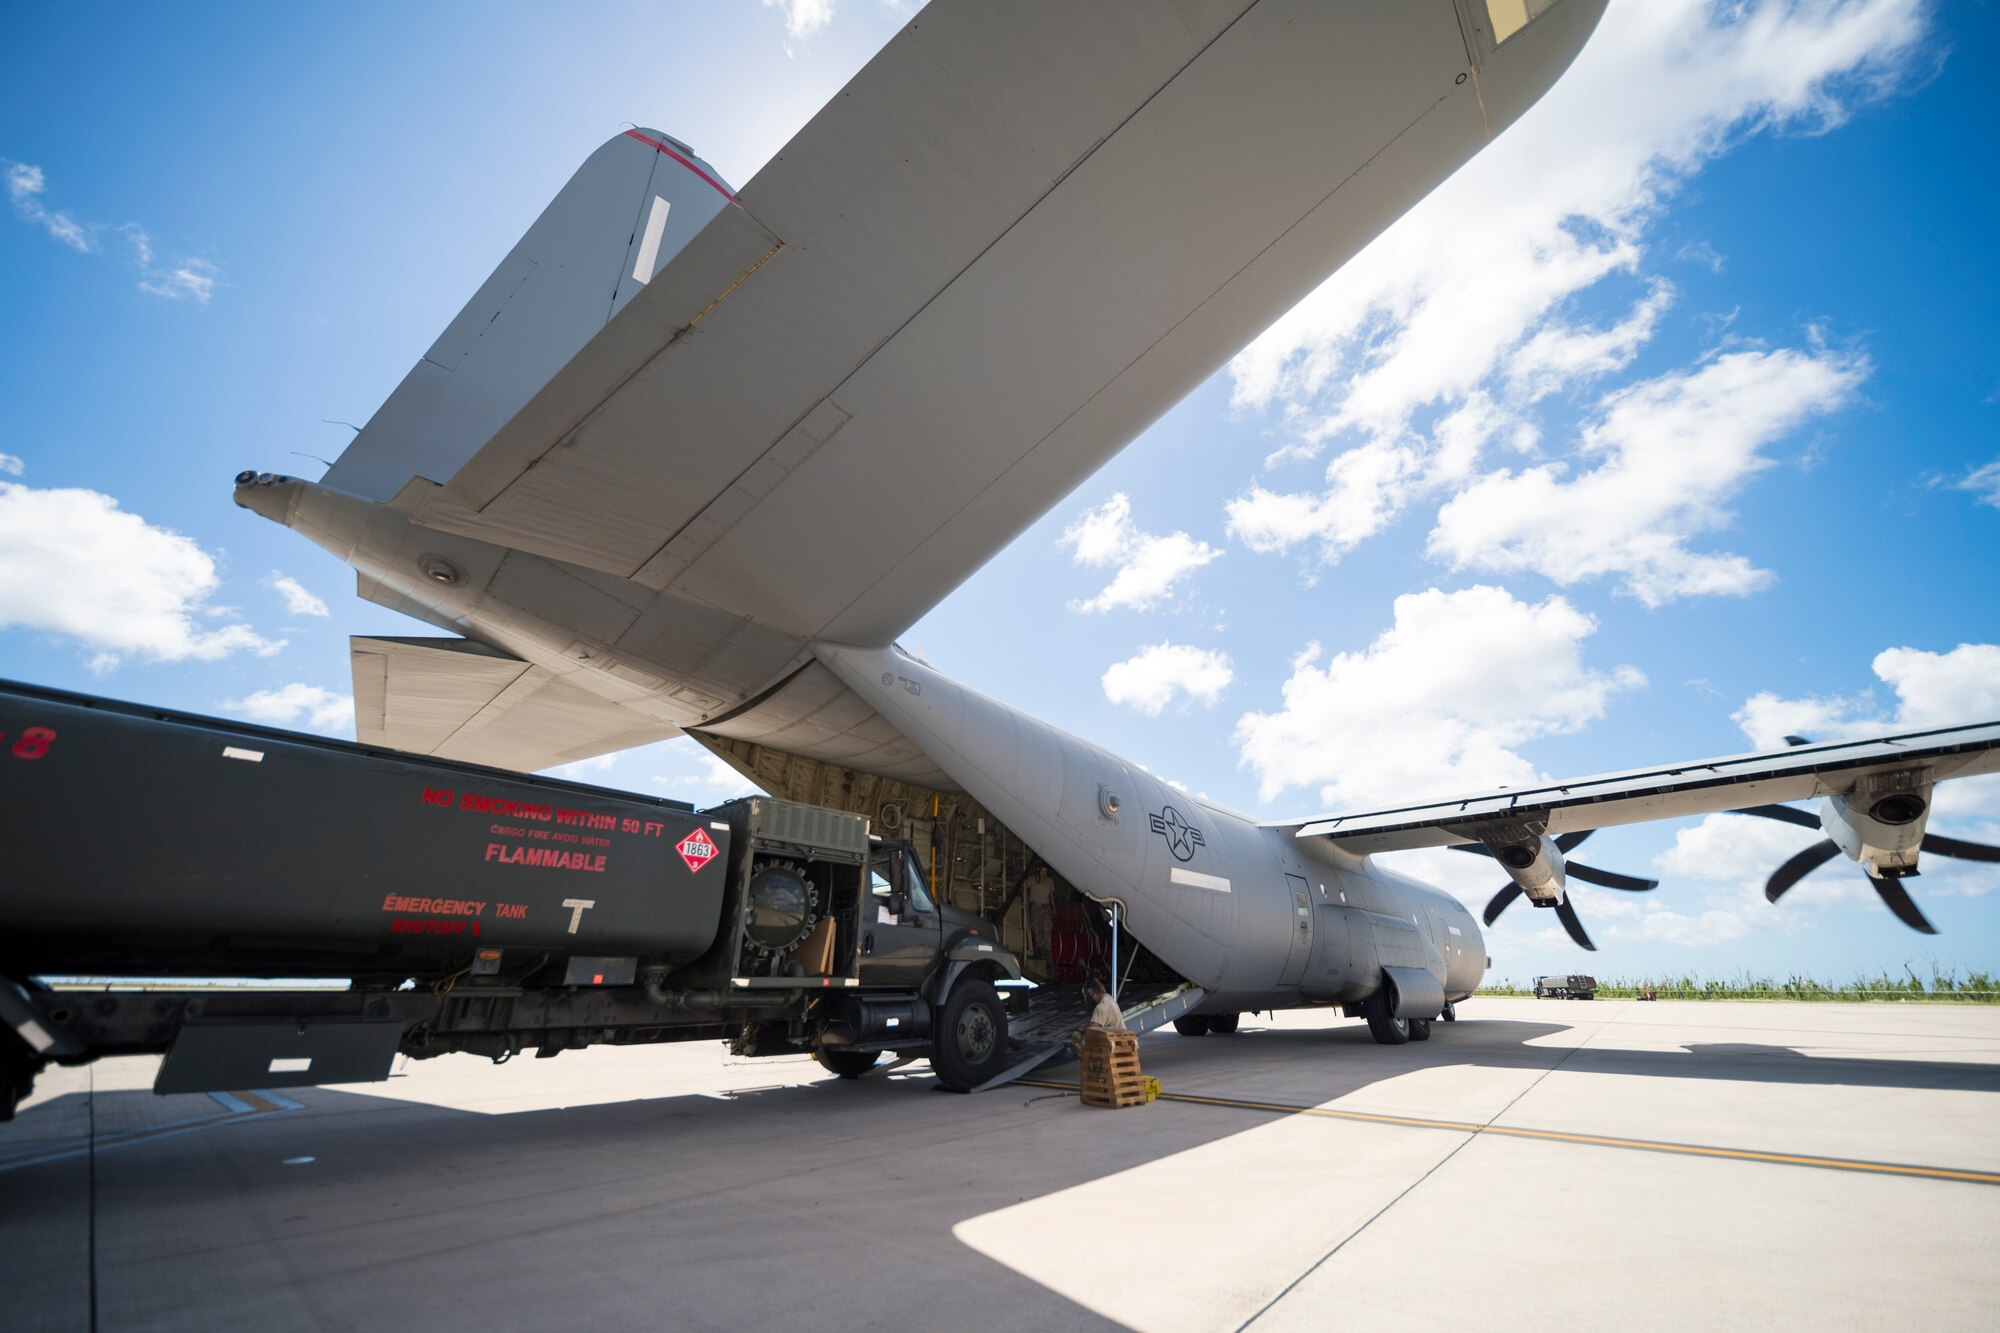 Airmen with the 36th Mobility Response Squadron, assigned to Andersen Air Base, Guam, load a fuel truck onto a C-130J Super Hercules during flight line operations in Saipan, Commonwealth of the Northern Mariana Islands, Nov. 20, 2018, as part of the Super Typhoon Yutu relief effort.